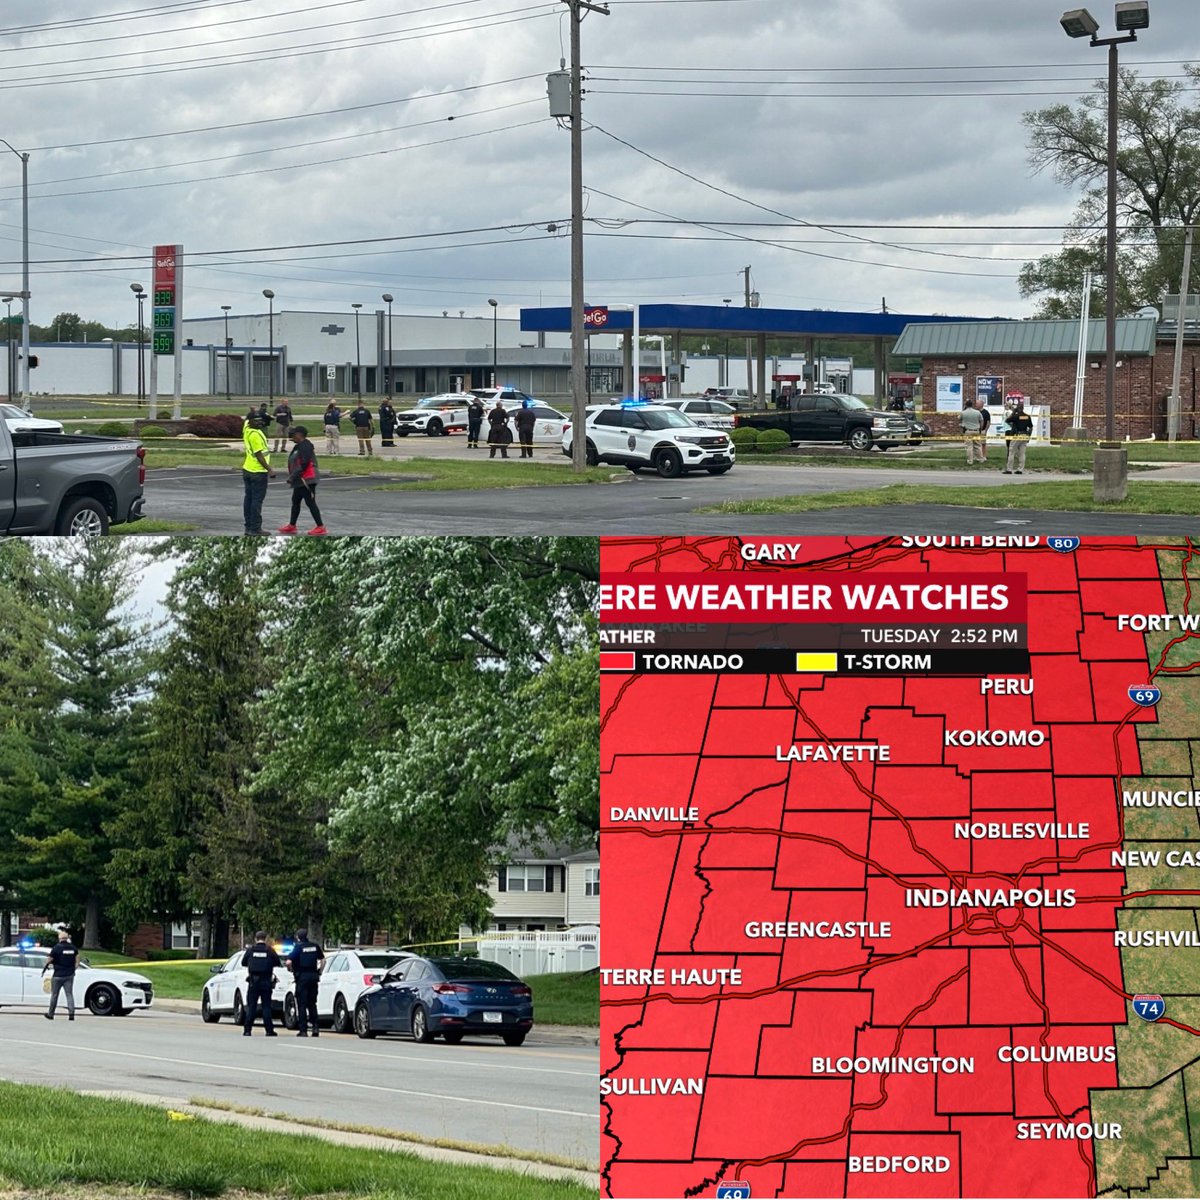 Busy afternoon! Right now we have an officer involved shooting in Anderson at a gas station, a person shot and killed in the road at 79th and Harcourt and a tornado watch. I’ll update when I can. Also check fox59.com and @FOX59 for LIVE updates.